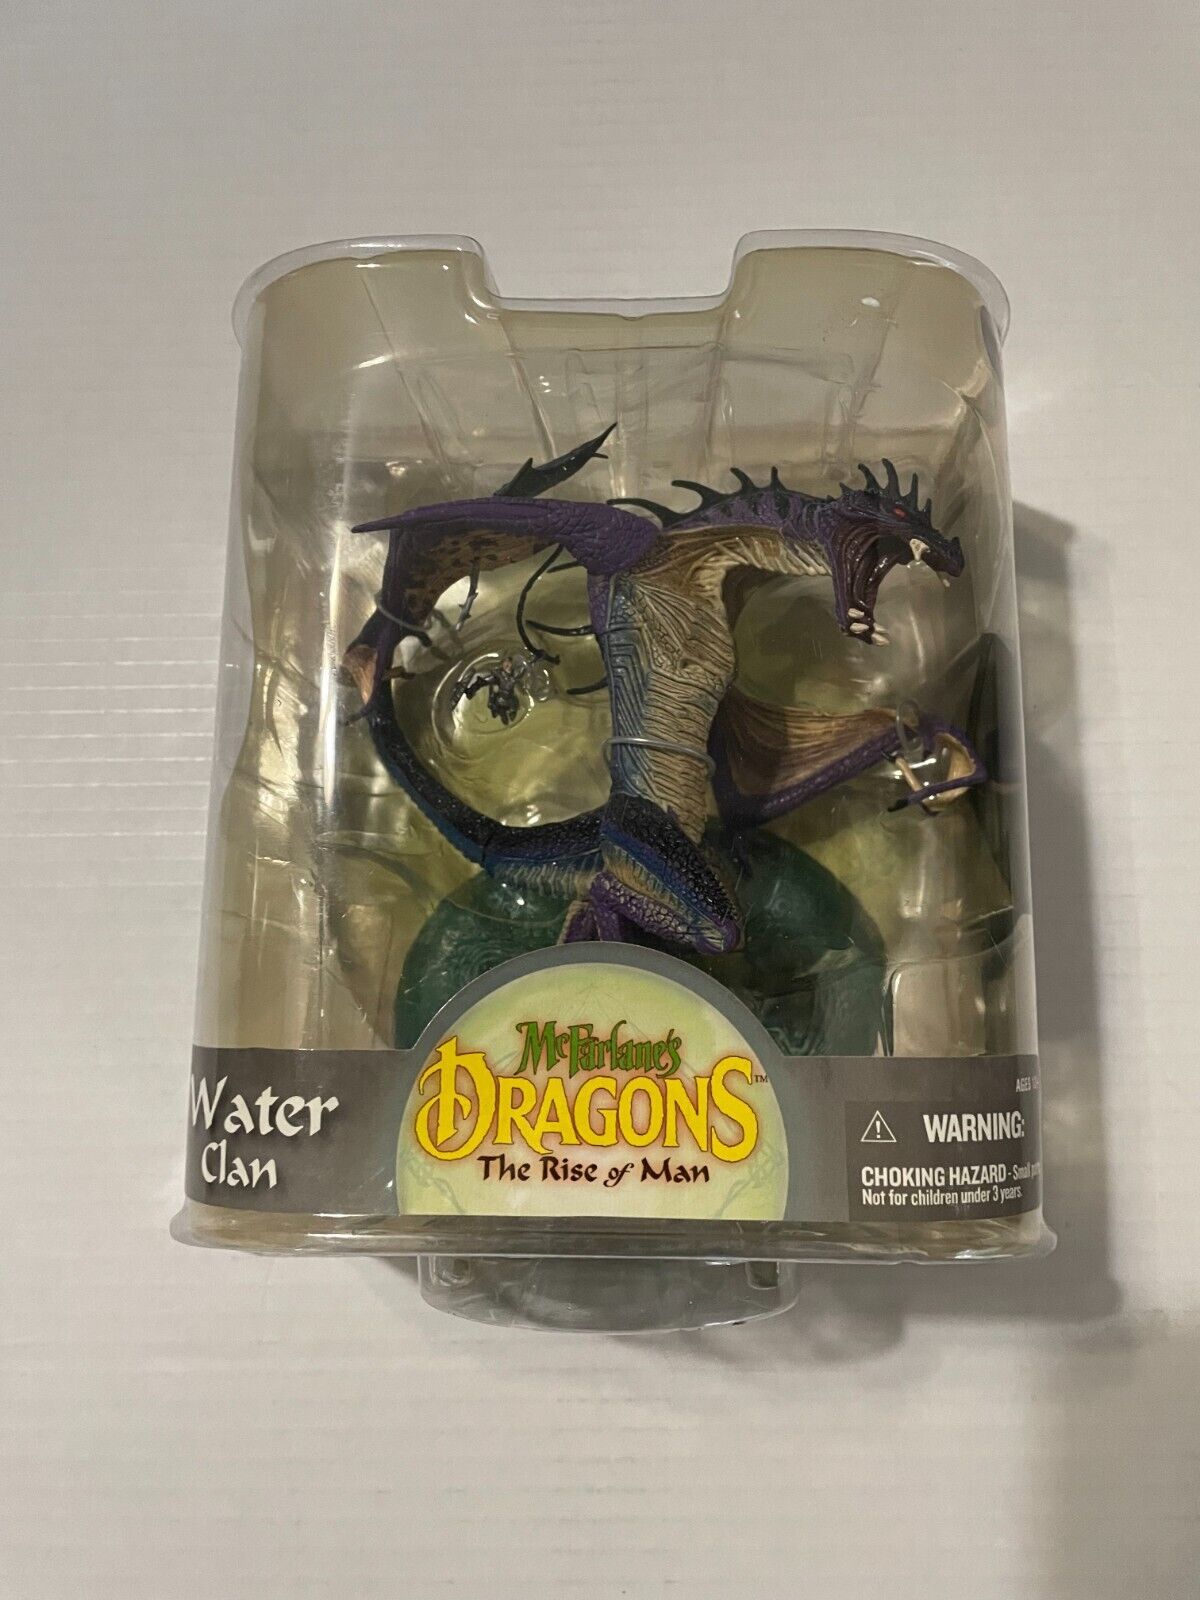 McFarlane's Dragons The Rise of Man Series 8 Water Clan Action Figure 2008 - $18.99